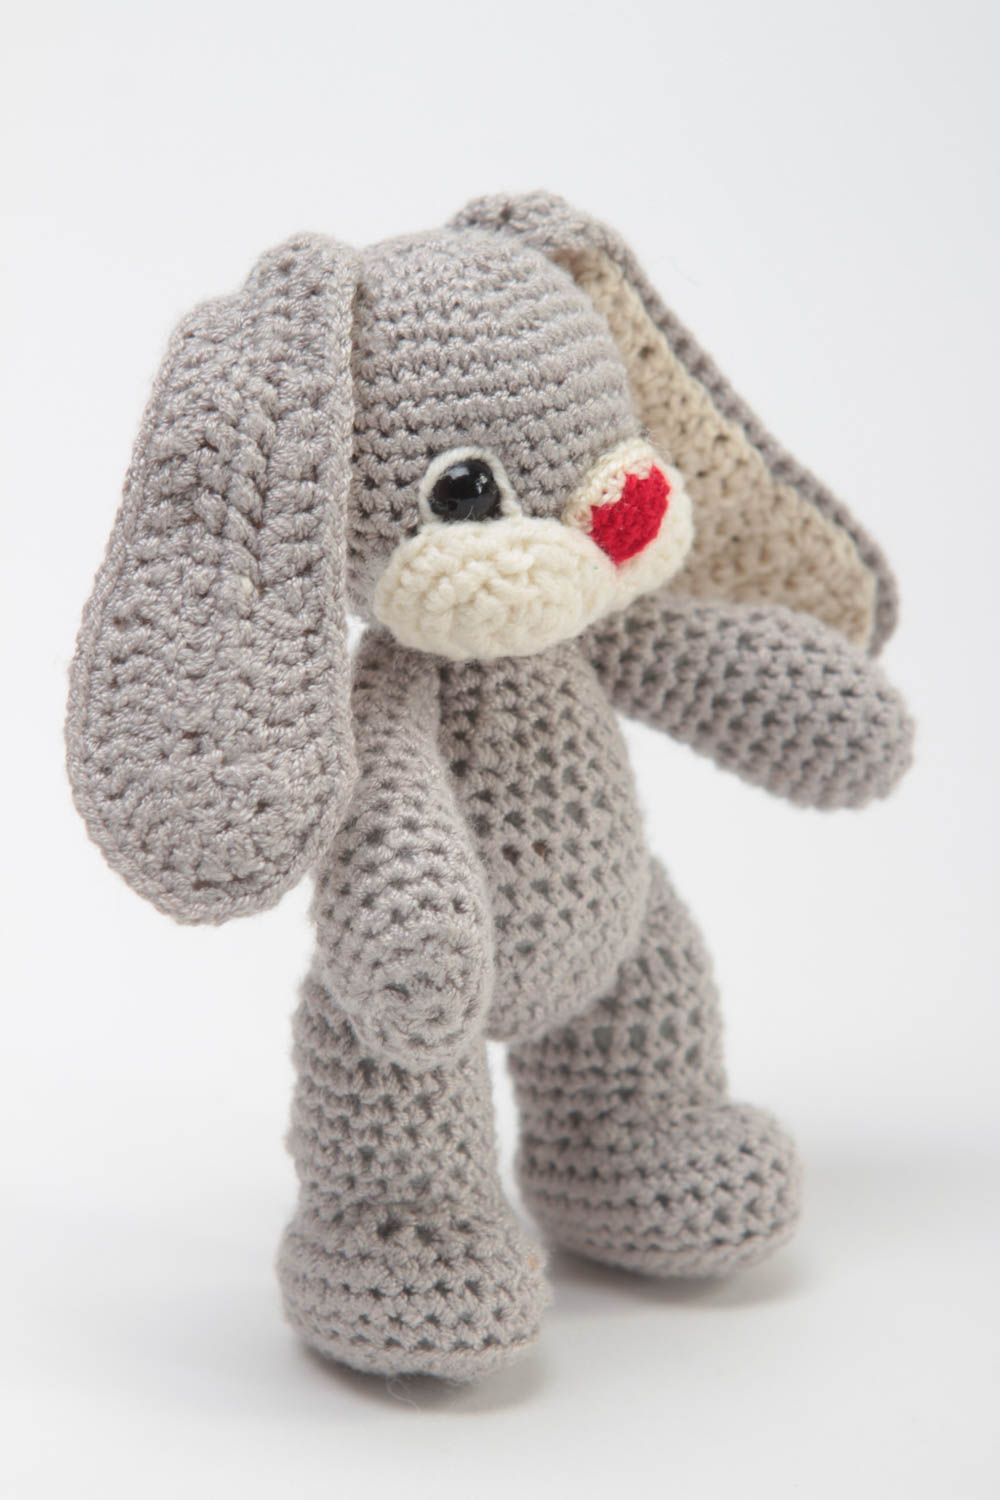 Unusual handmade soft toy crochet stuffed toy hare best toys for kids photo 2